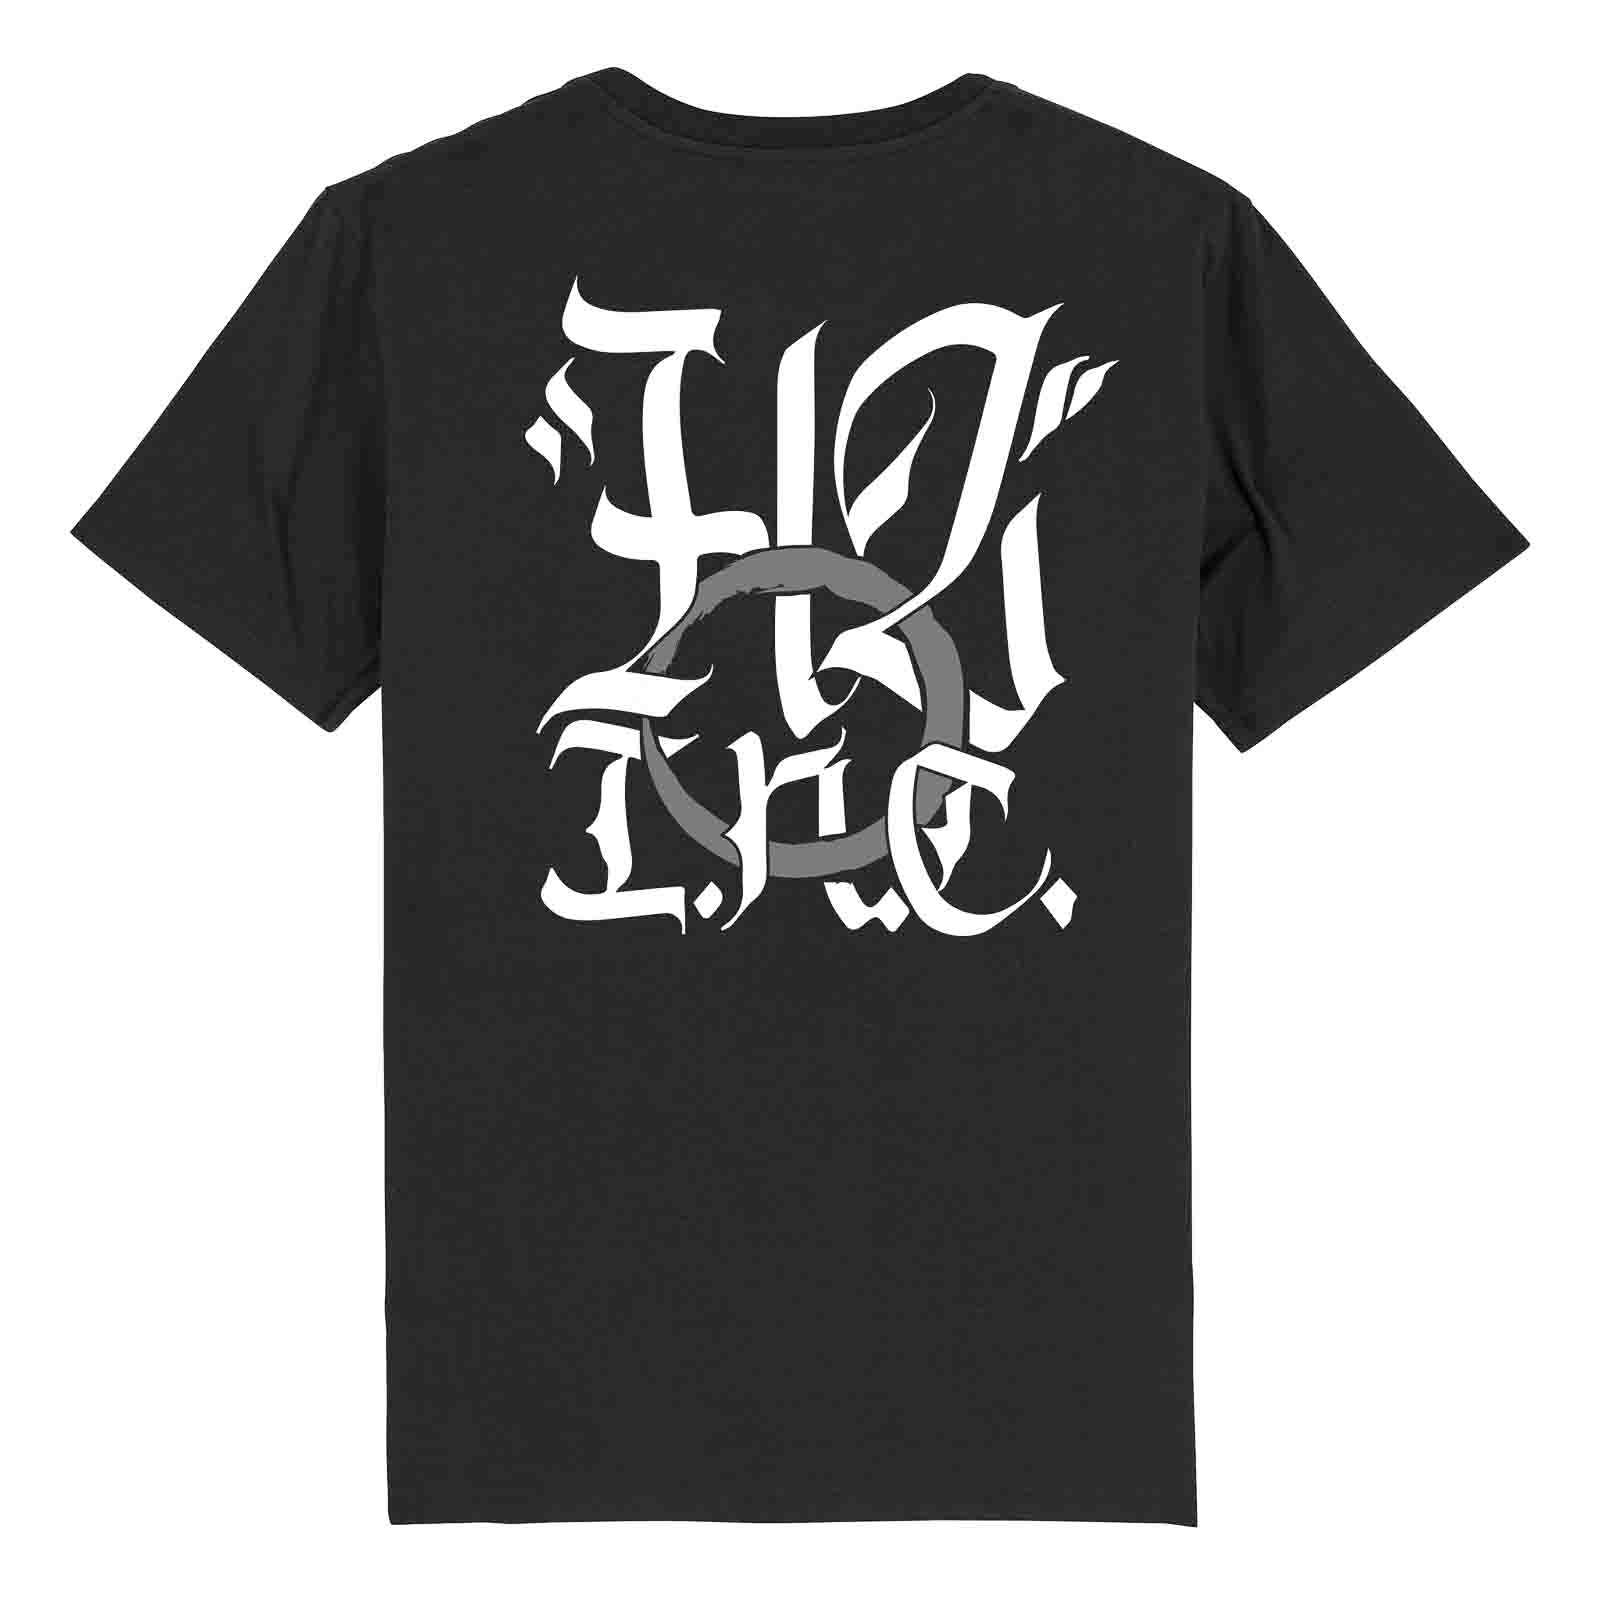 Uztzu Clothing - Shop Super Four-in-One T-shirts, Pants and hoodies ...